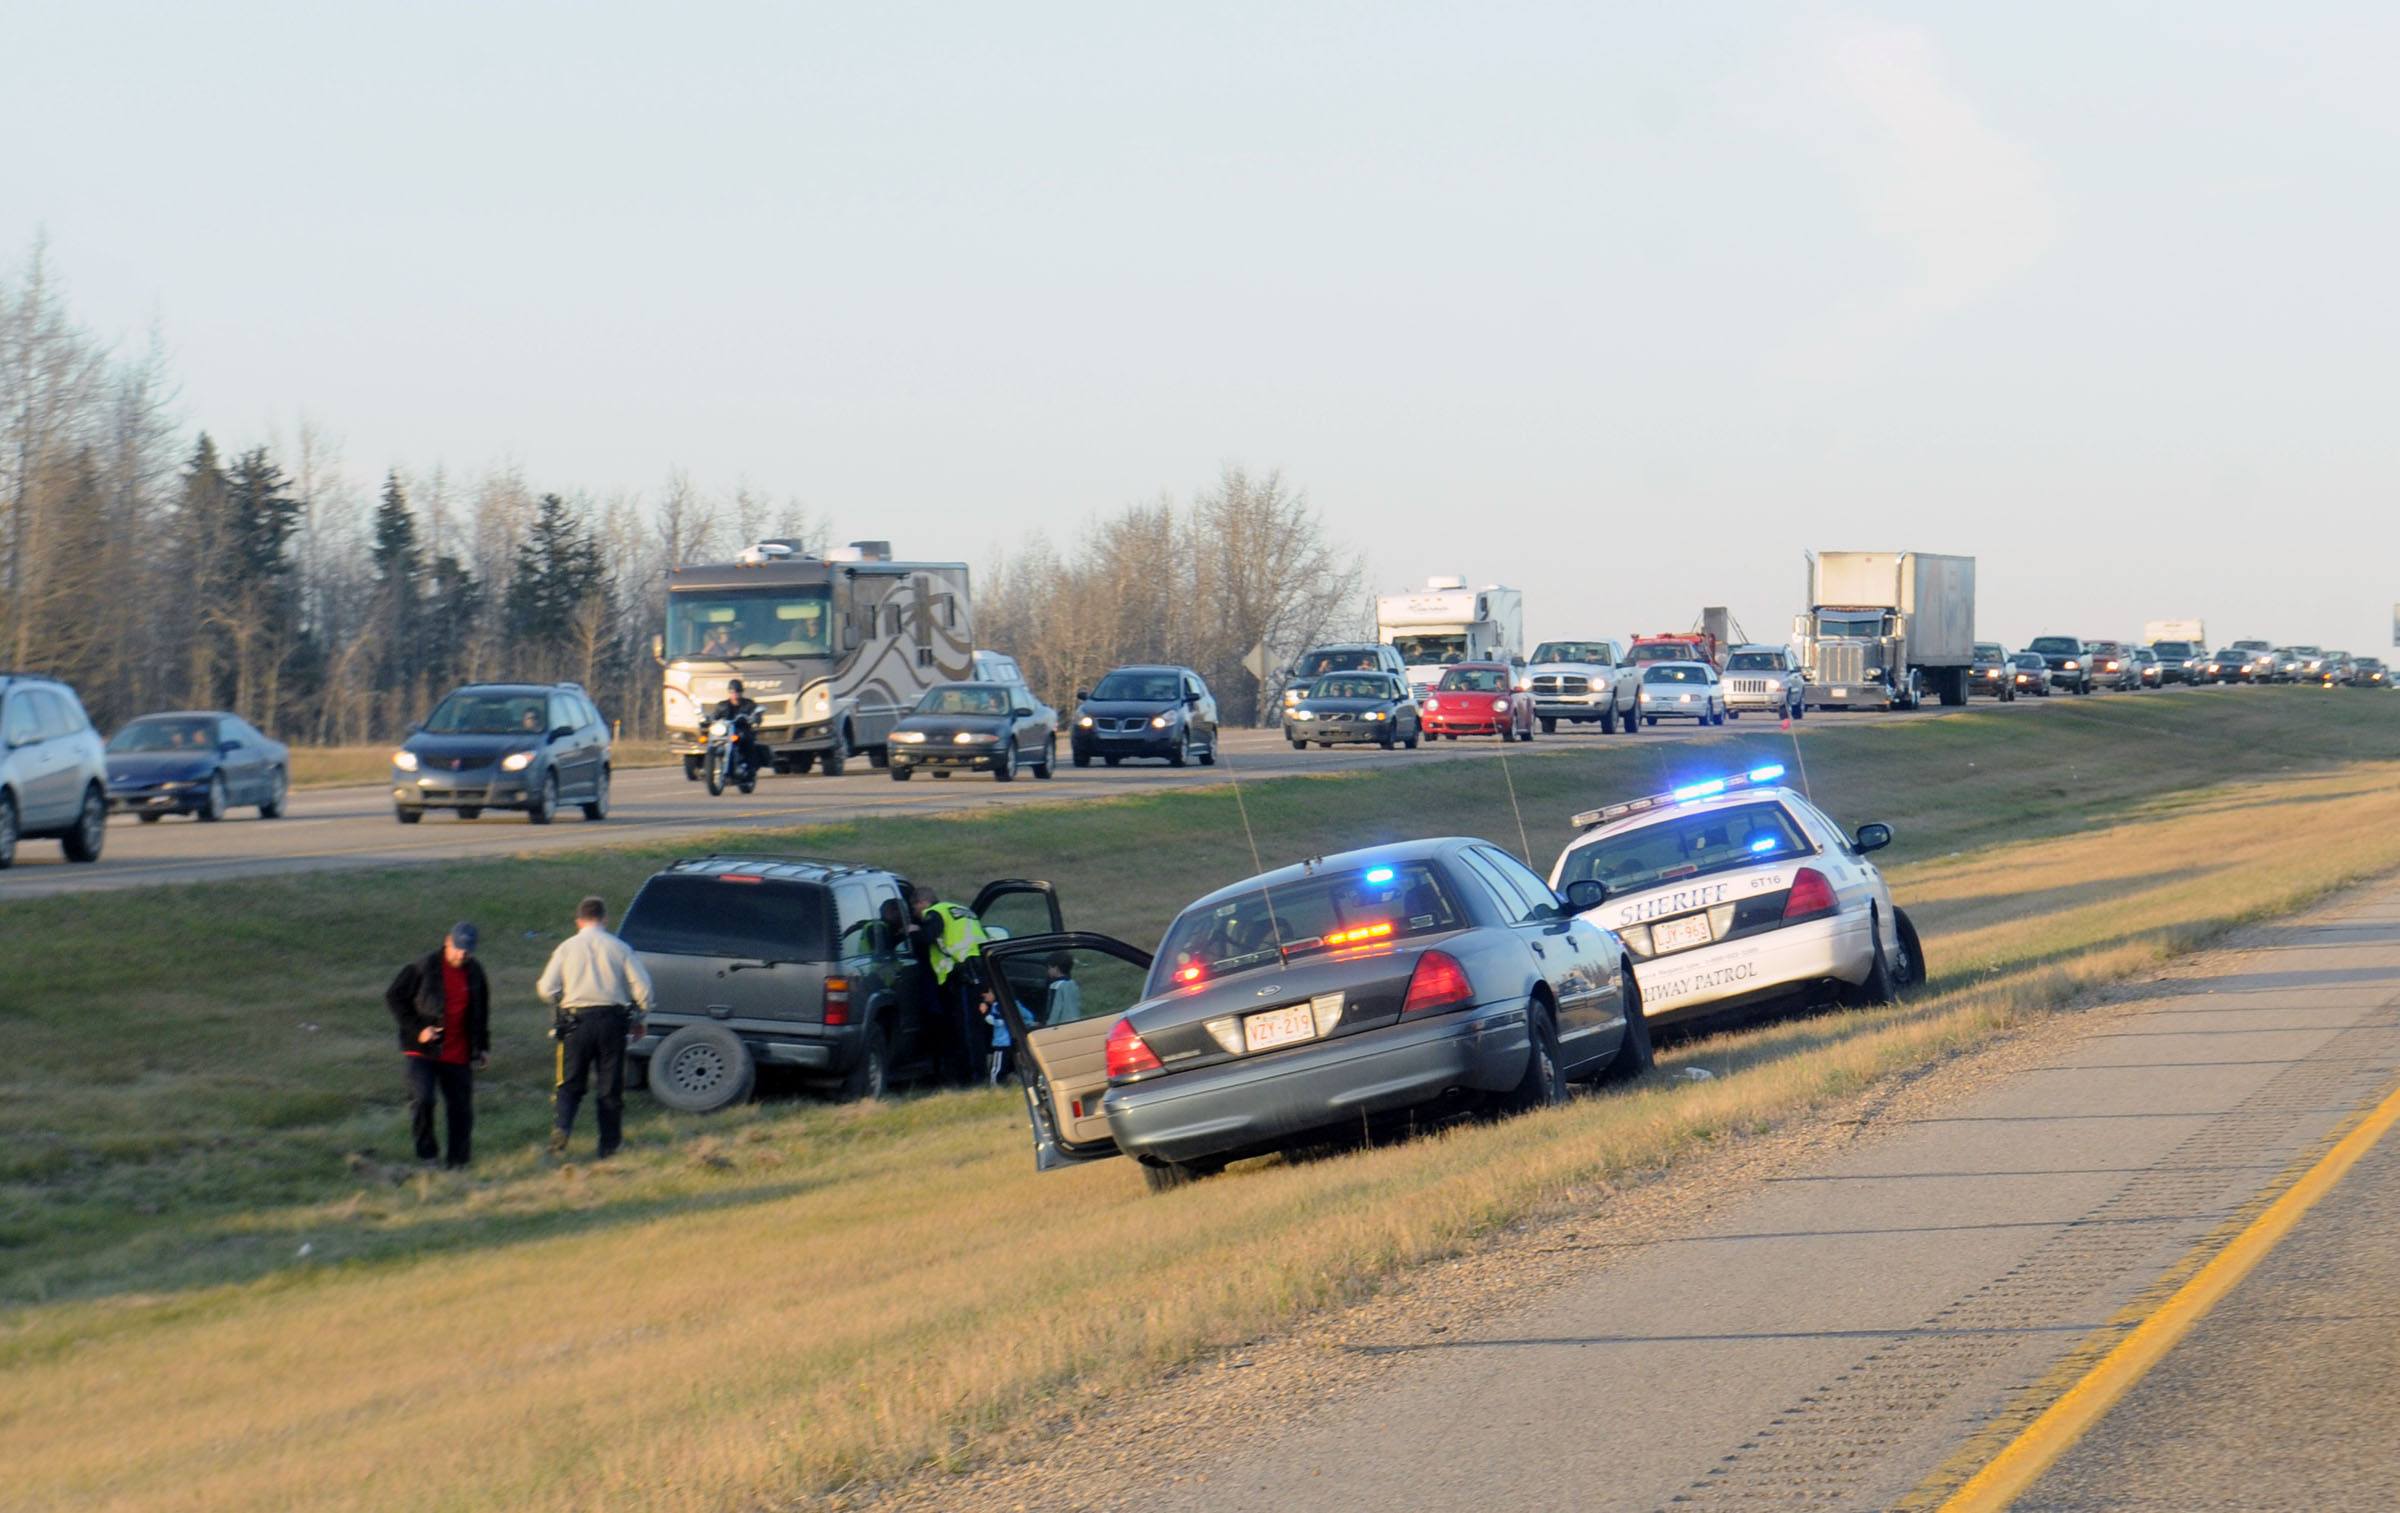 Minor accidents Friday only added to the long weekend rush as traffic backed up along the QEII north of the City. Only minor injuries were reported in some cases keeping Red Deer Emergency Services Crews on their feet.